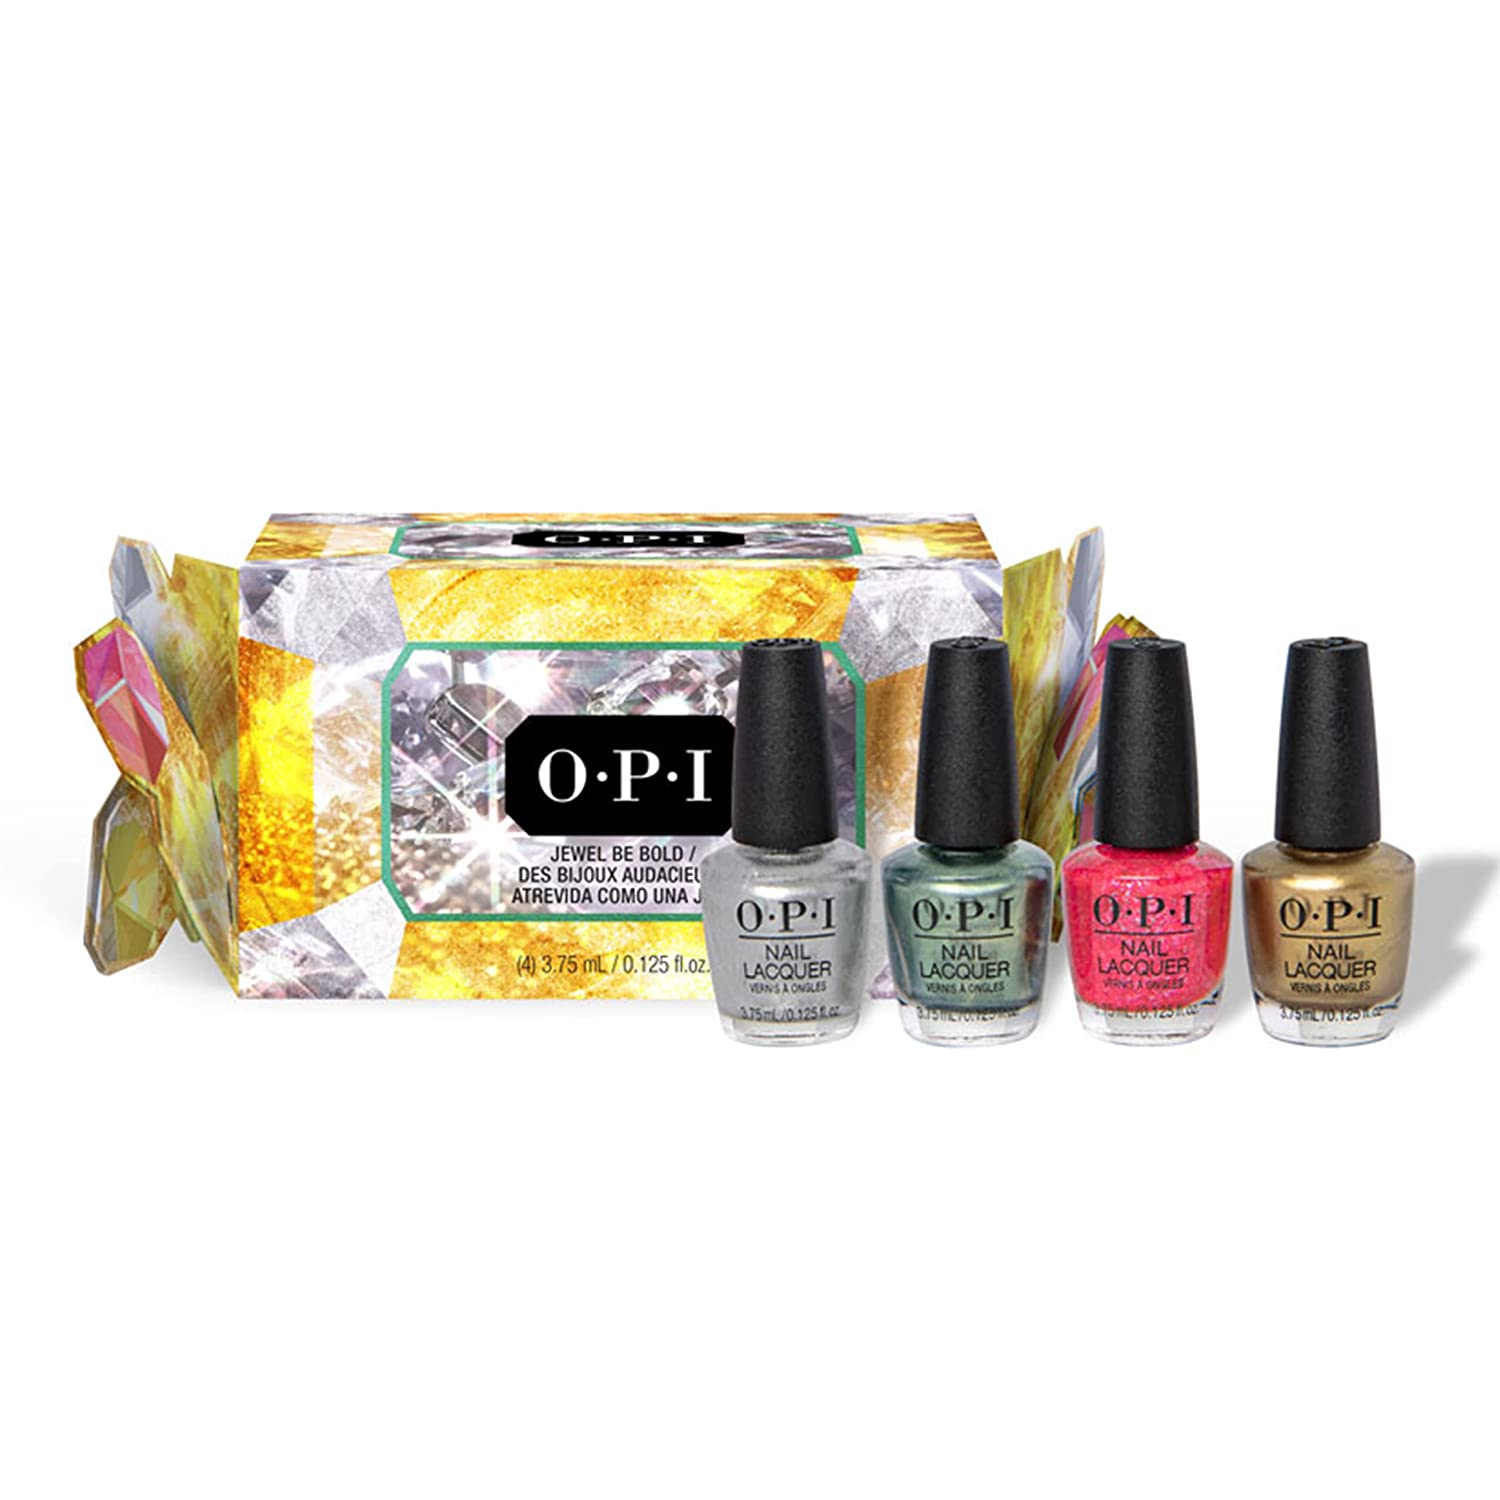 Loreal Professionnel OPI Jewel be Bold Festive Collection Cracker - Nail Lacquer Nail Polish Gift Set - 4 Minis Nail Polish with Up to 7 Days Hold - with Extra Wide ProWide Brush - 4 x 3.75 ml